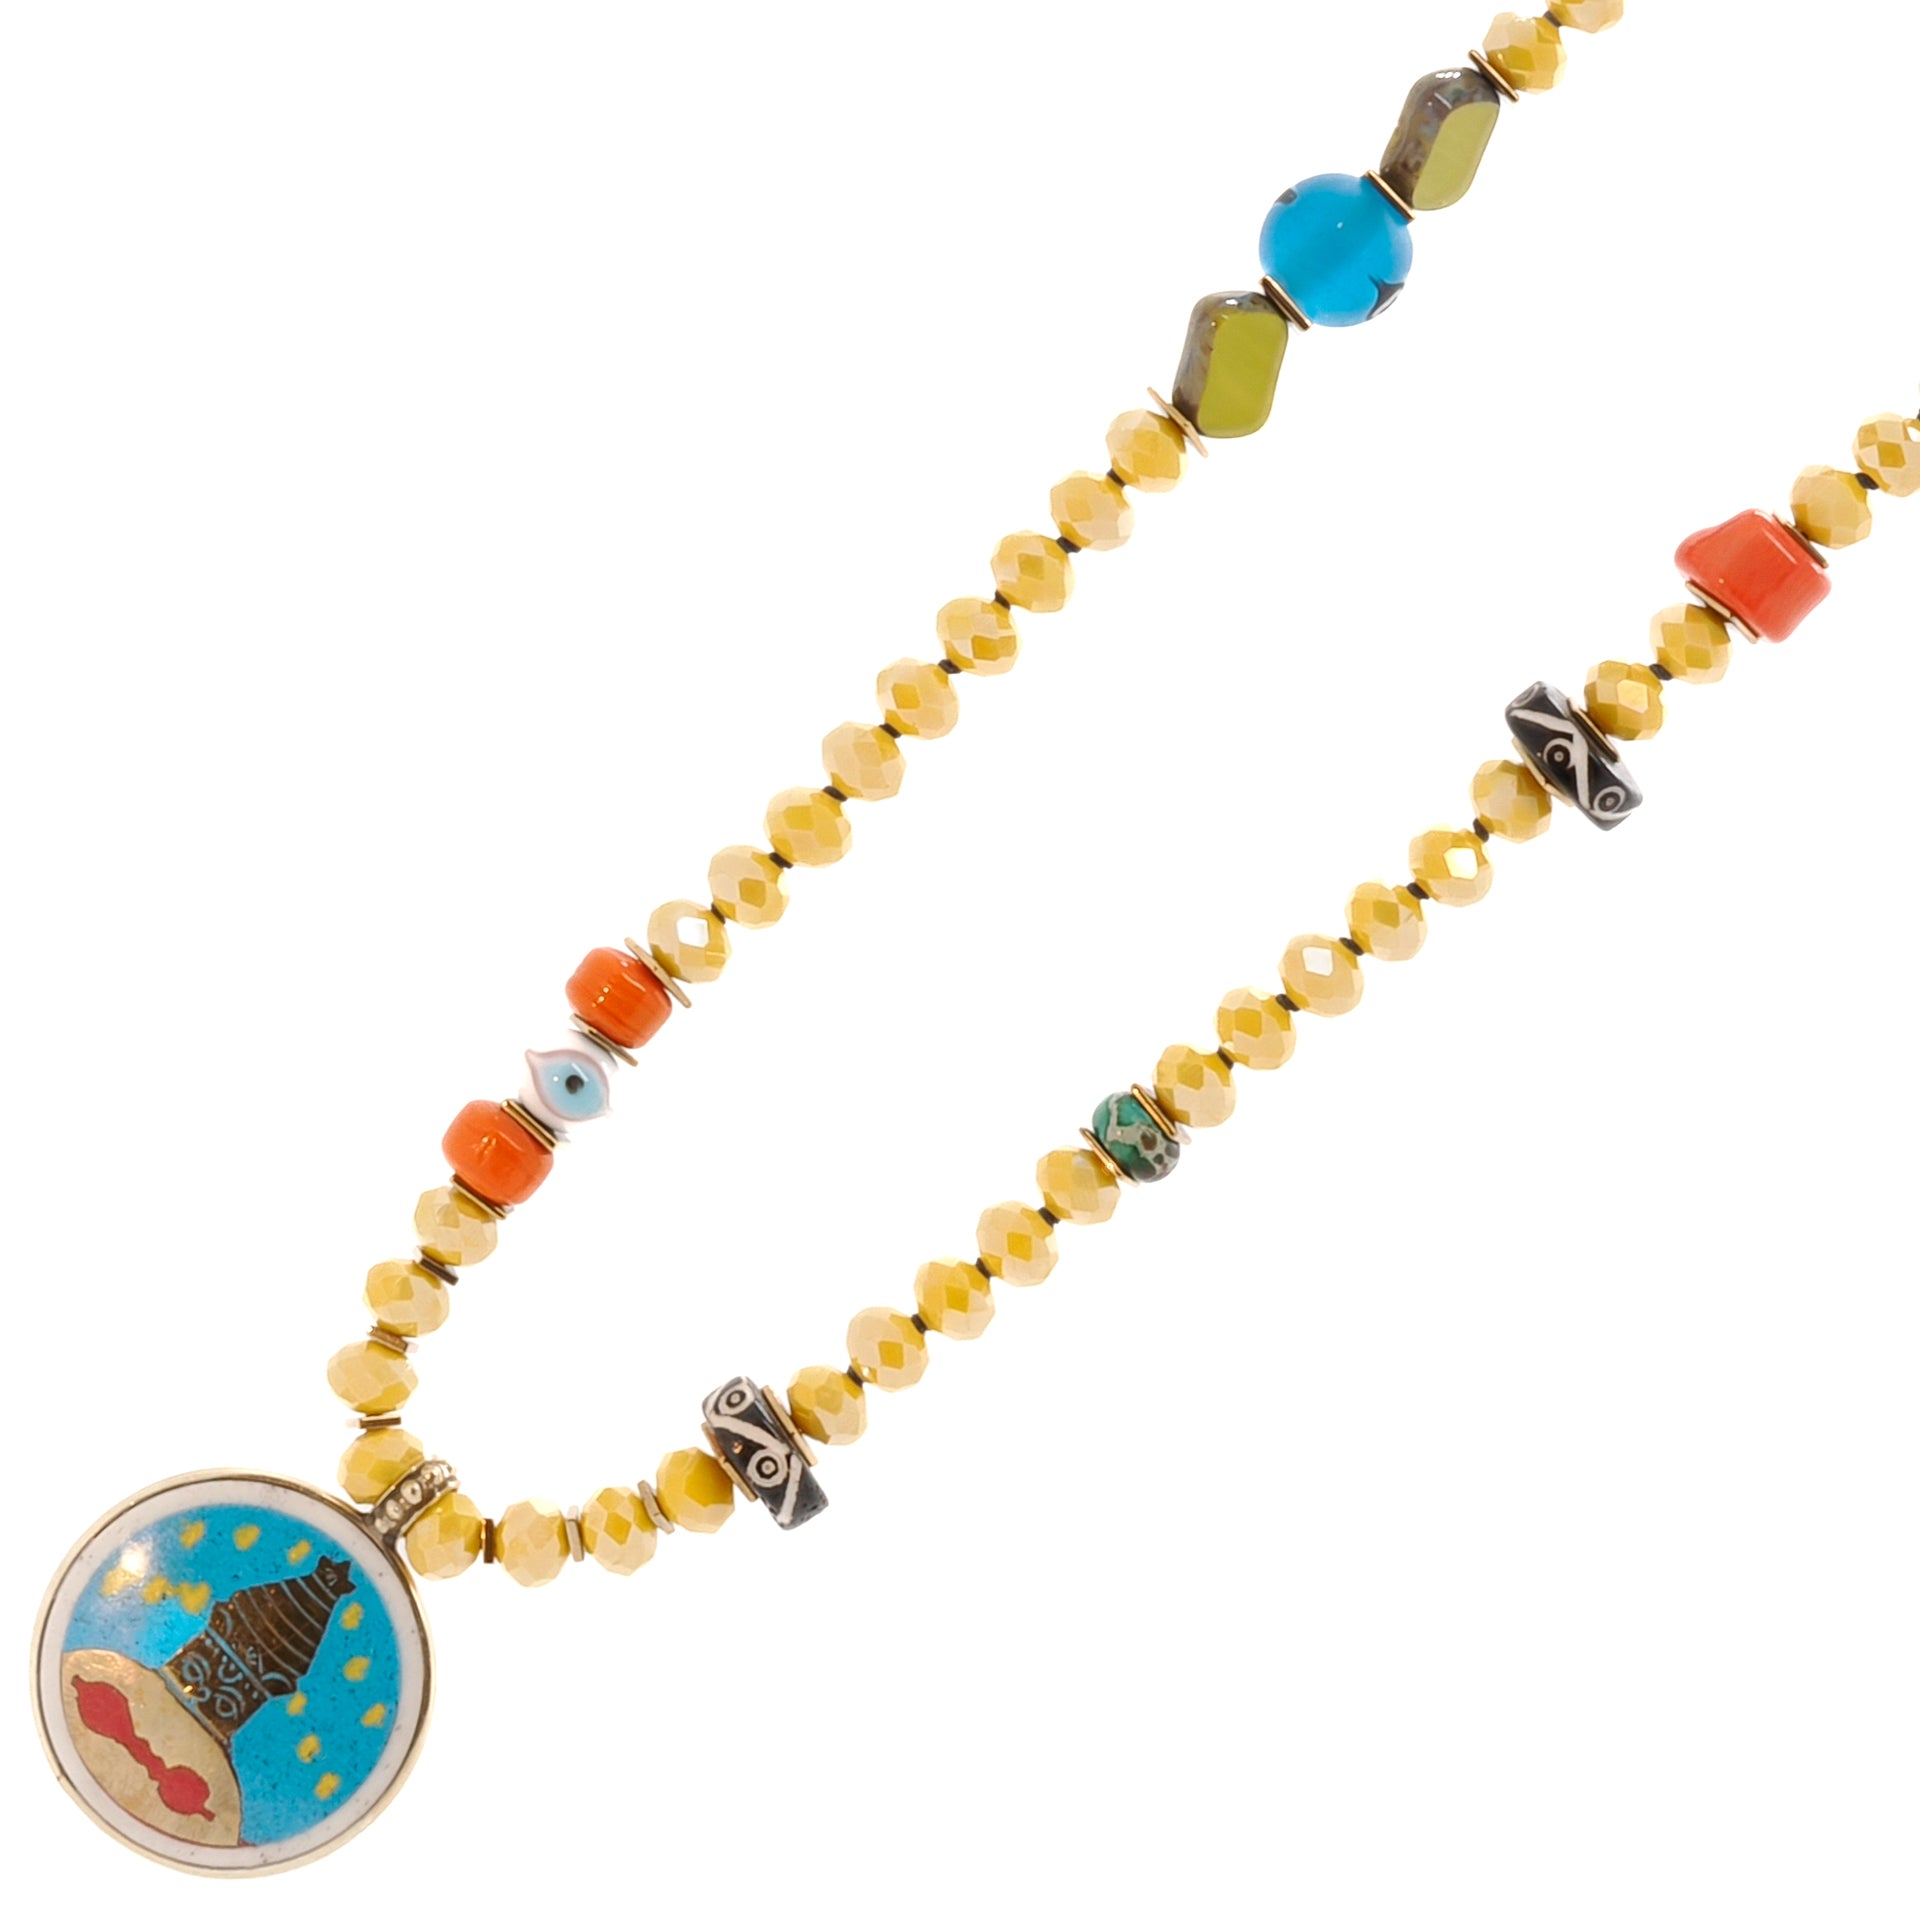 Embrace positivity with the colorful African beads and Om charm of the Yoga Serenity Necklace.